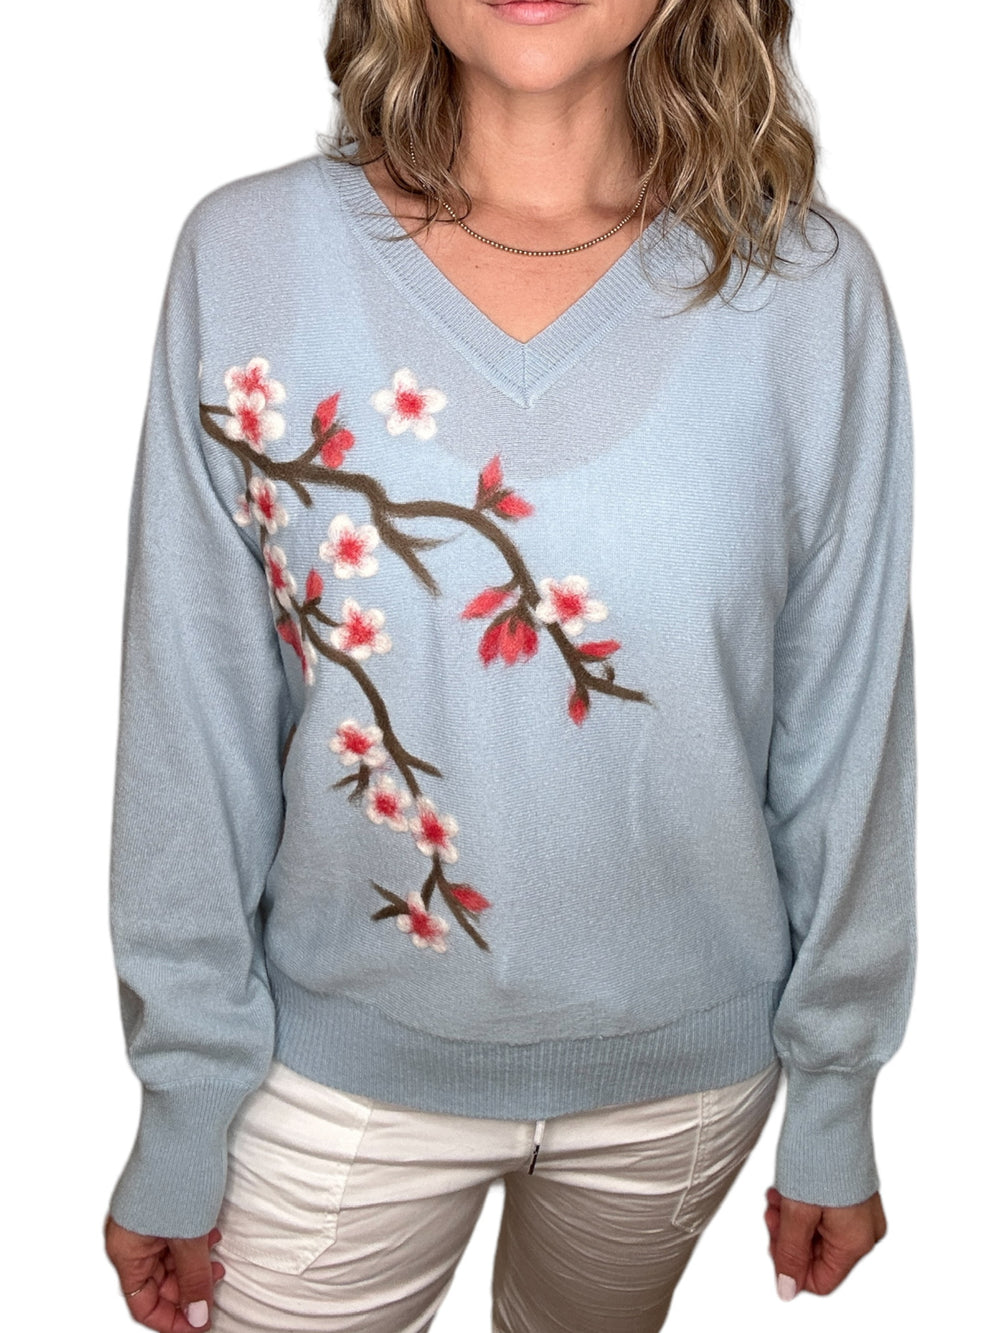 CASHMERE V-NECK CHERRY BLOSSOM SWEATER-BABY BLUE - Kingfisher Road - Online Boutique